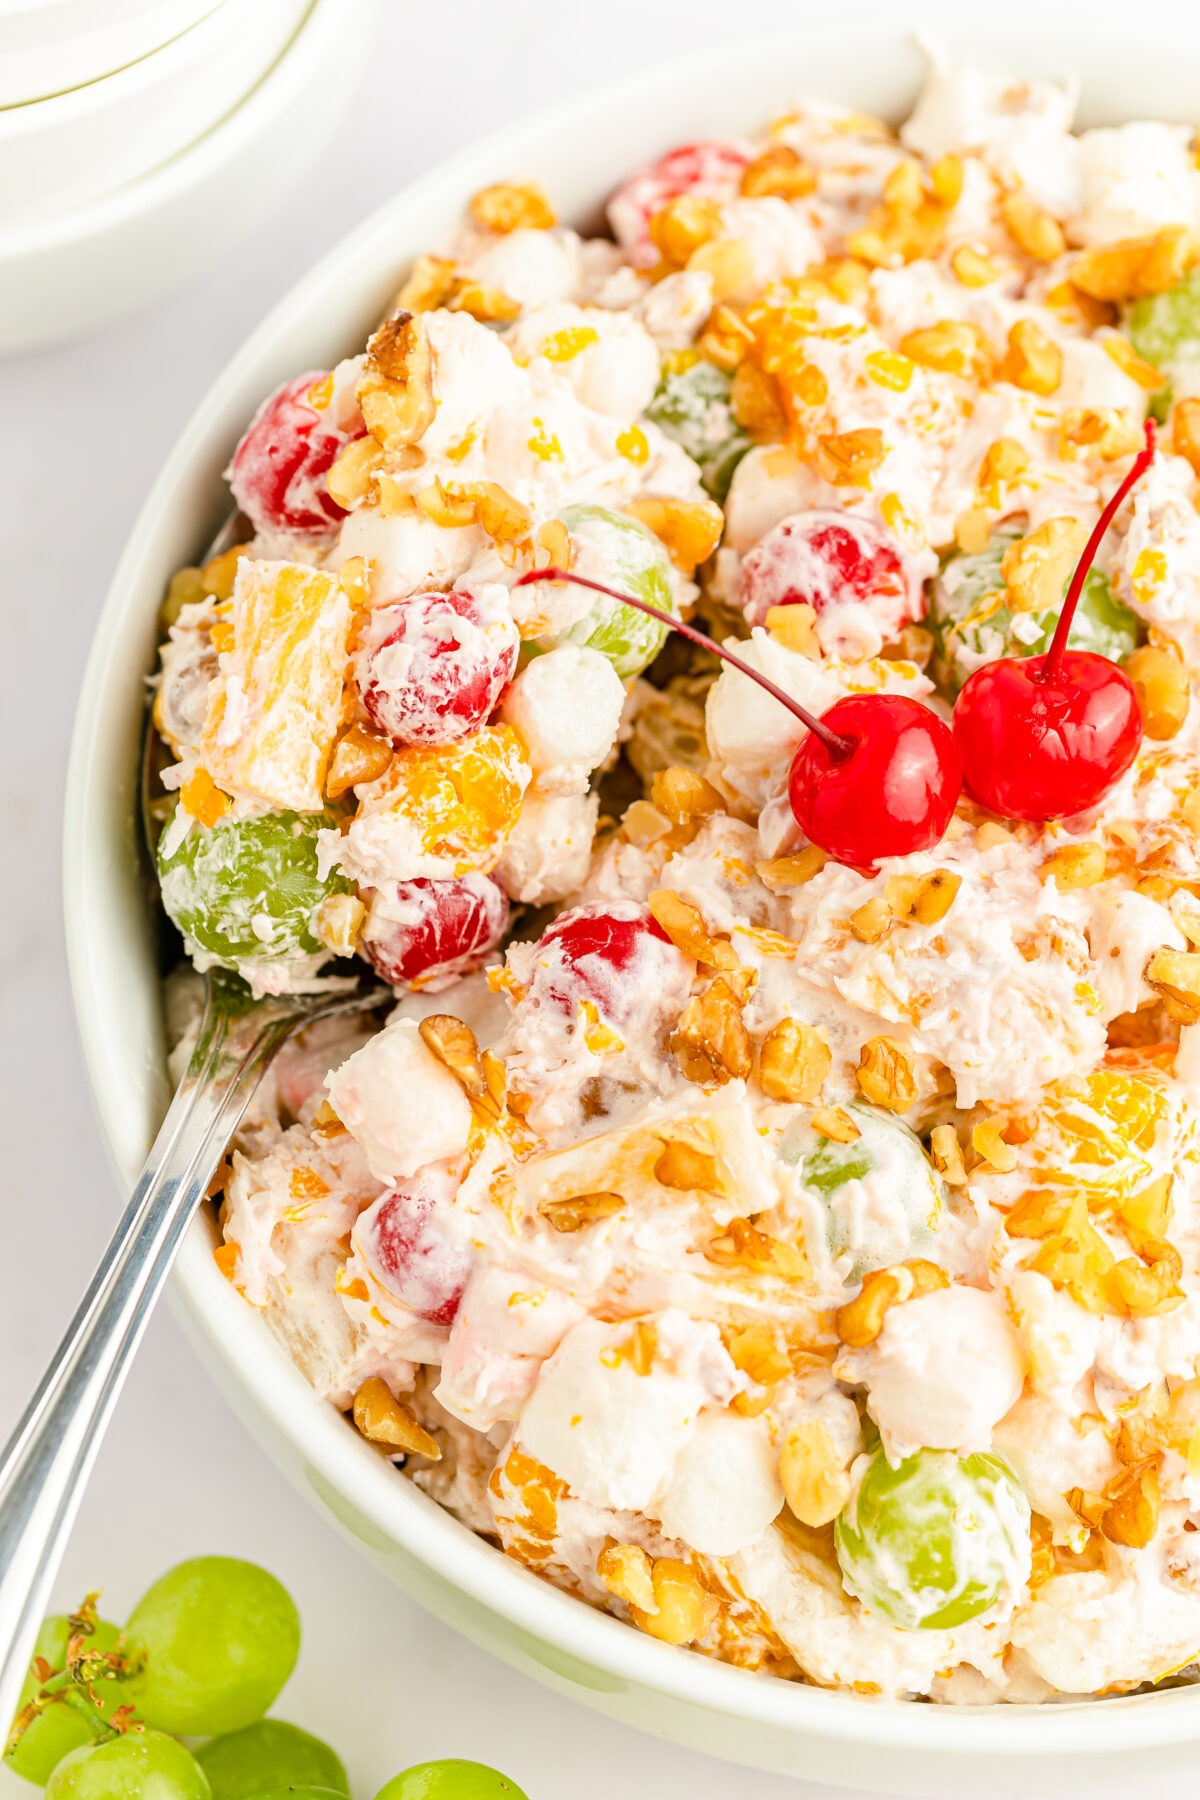 A classic ambrosia salad recipe that is sure to impress - this vintage salad features fruit tossed in a creamy dressing with marshmallows!